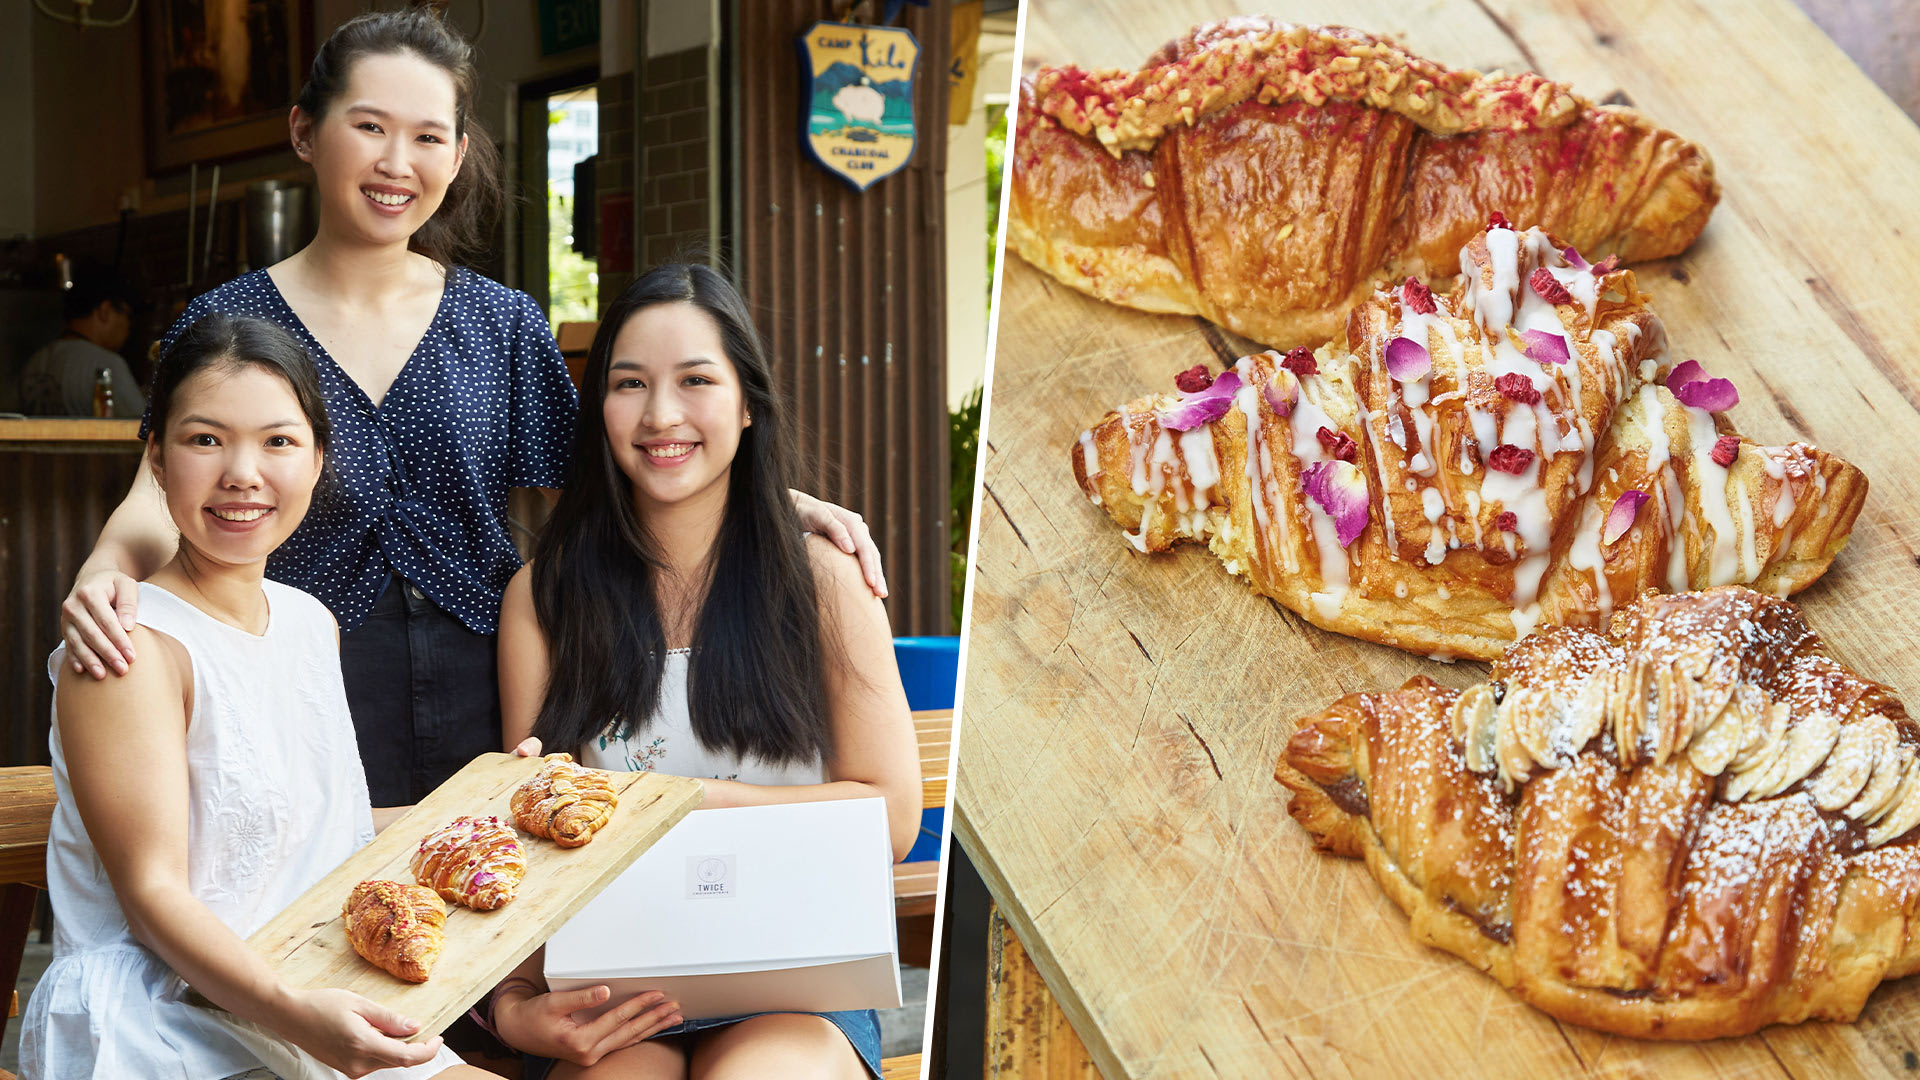 These Girls Want To “Rescue” Day-Old Croissants By Giving Them Fancy Makeovers